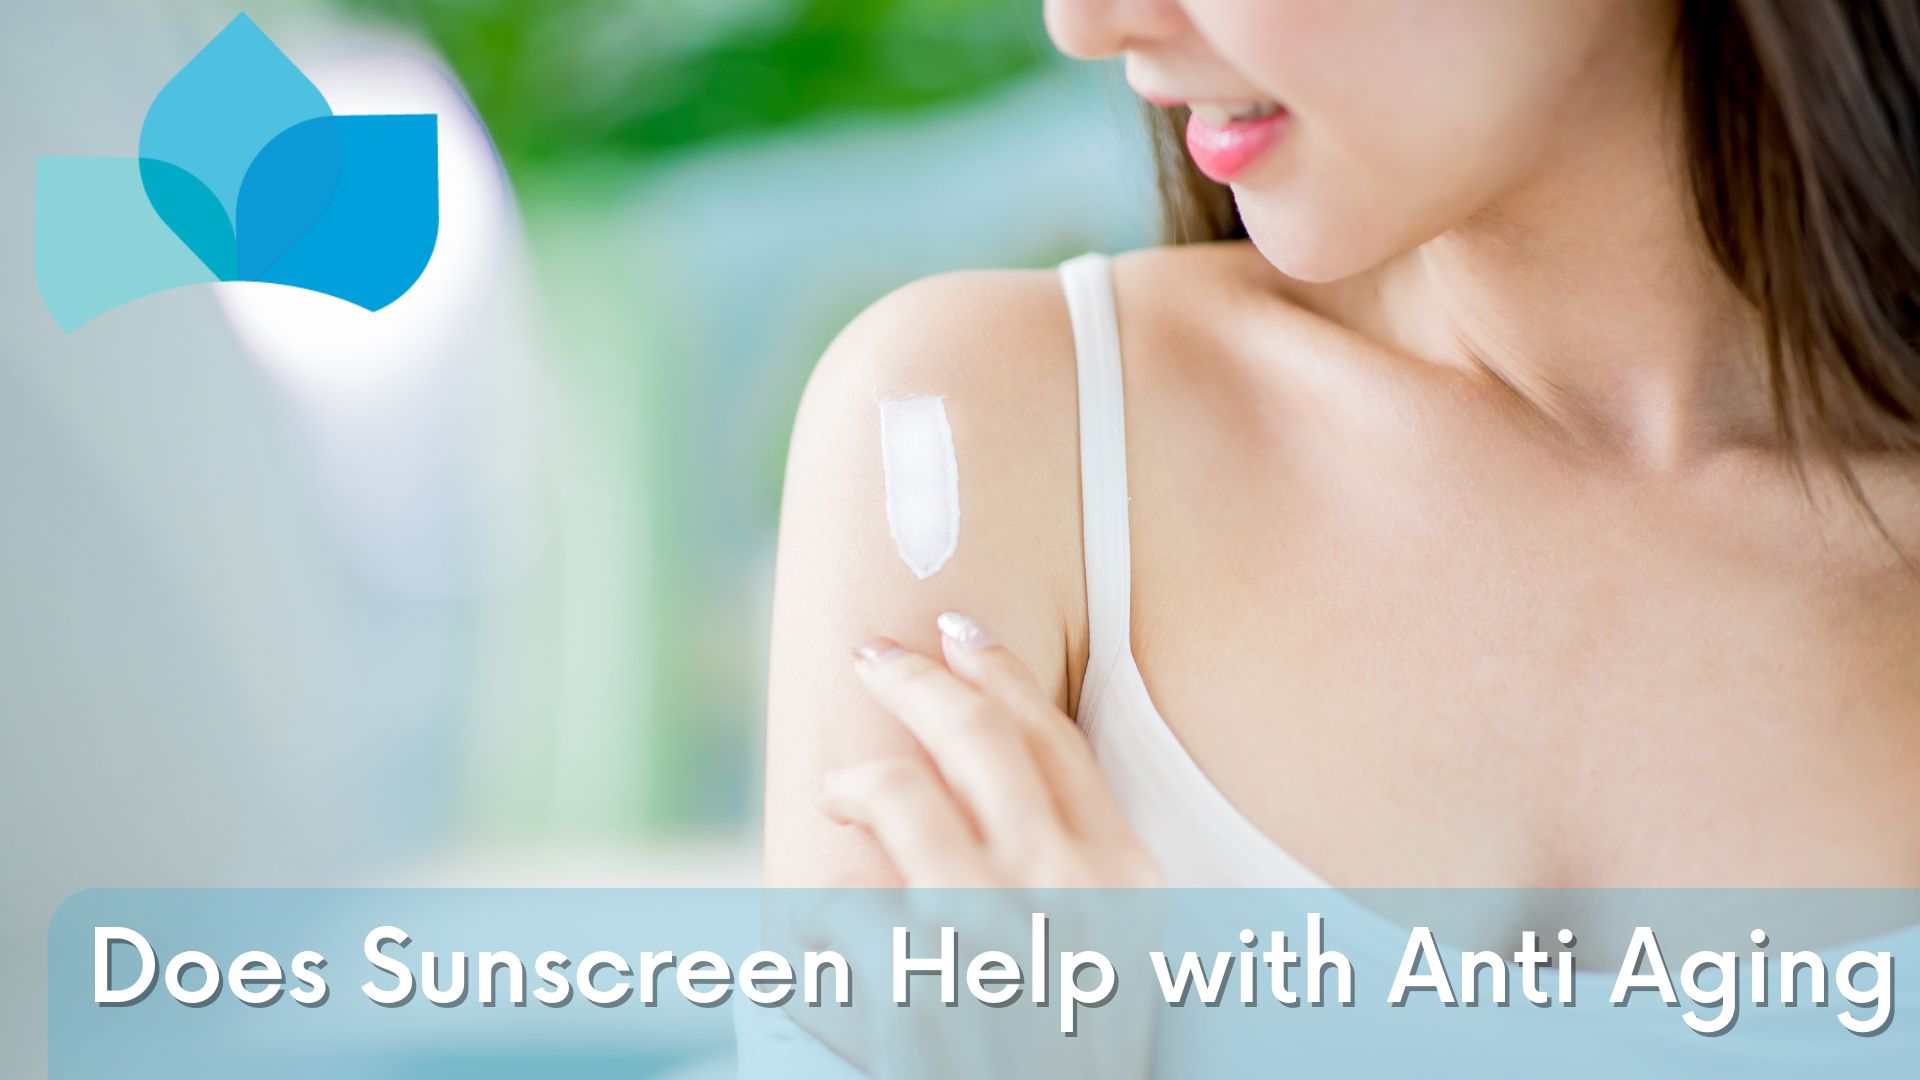 Does Sunscreen Help with Anti Aging